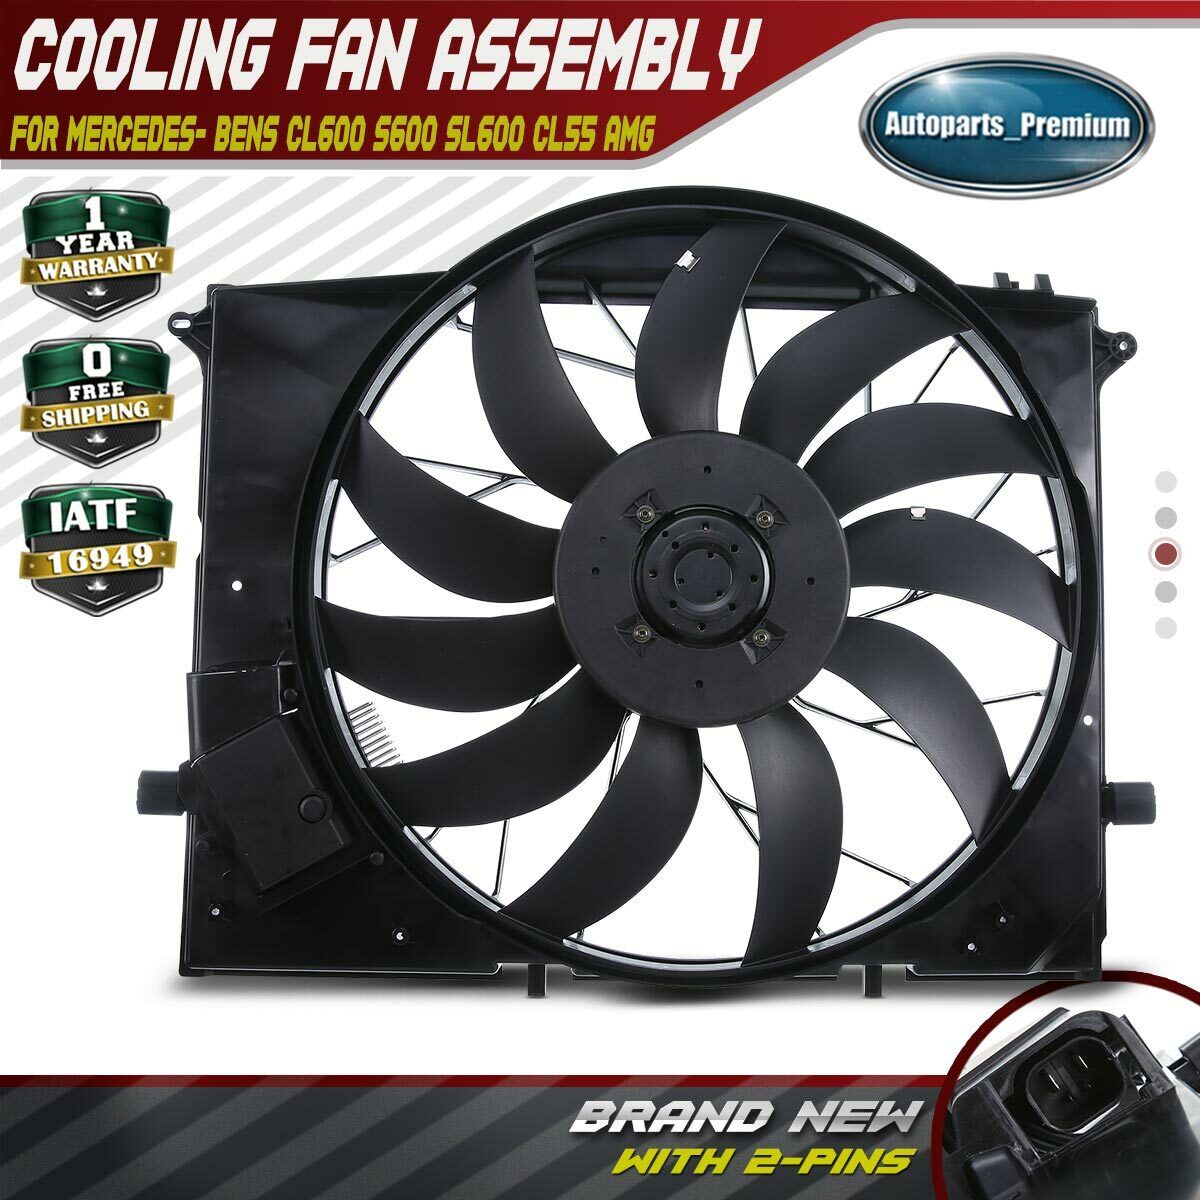 Brushless Motor Cooling Fan for Mercedes-Benz C215 W220 S500 S600 A2205000293